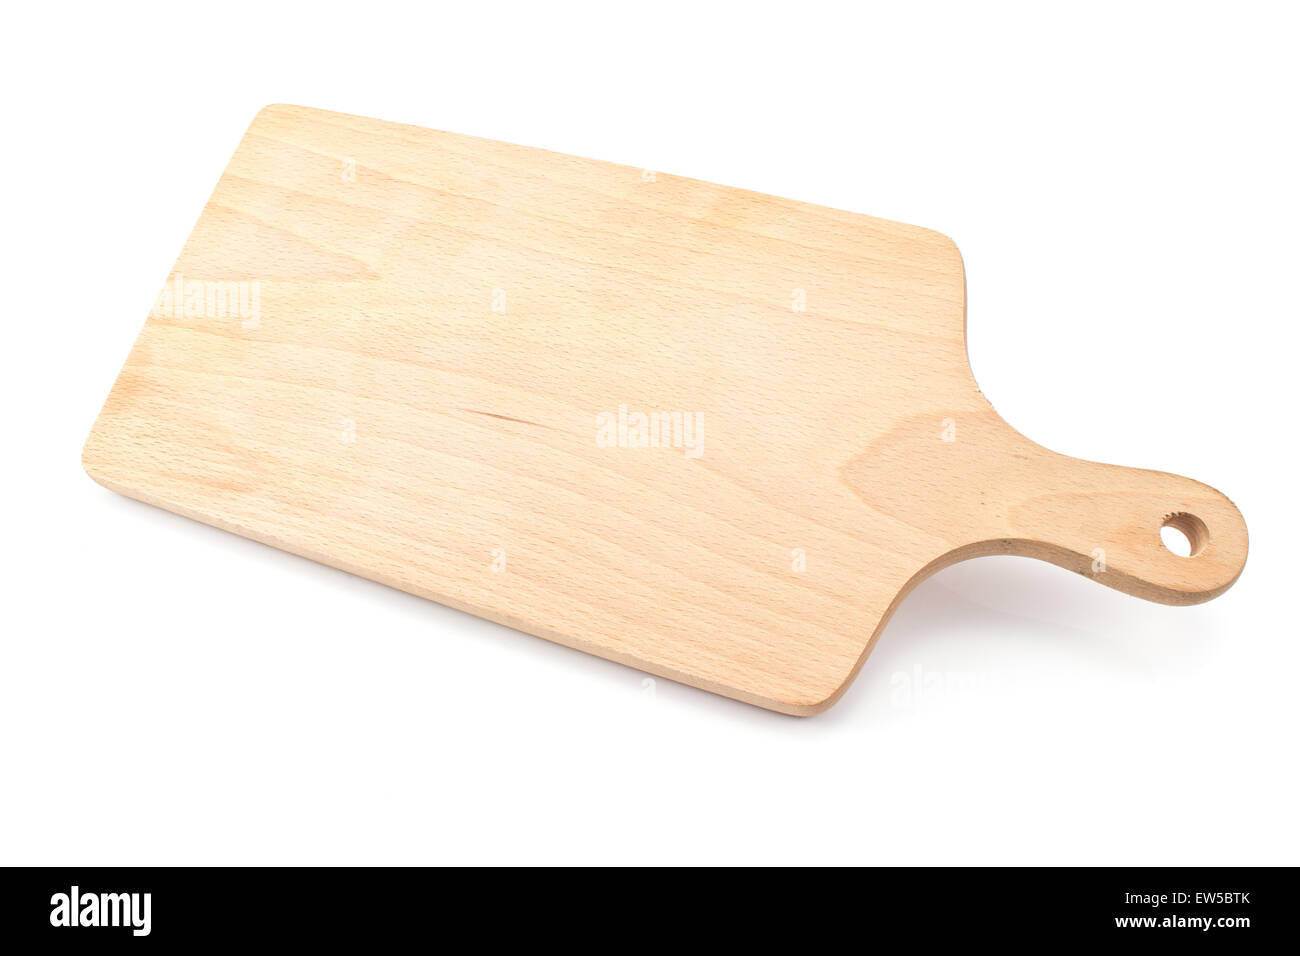 Wooden chopping board isolated on white Stock Photo